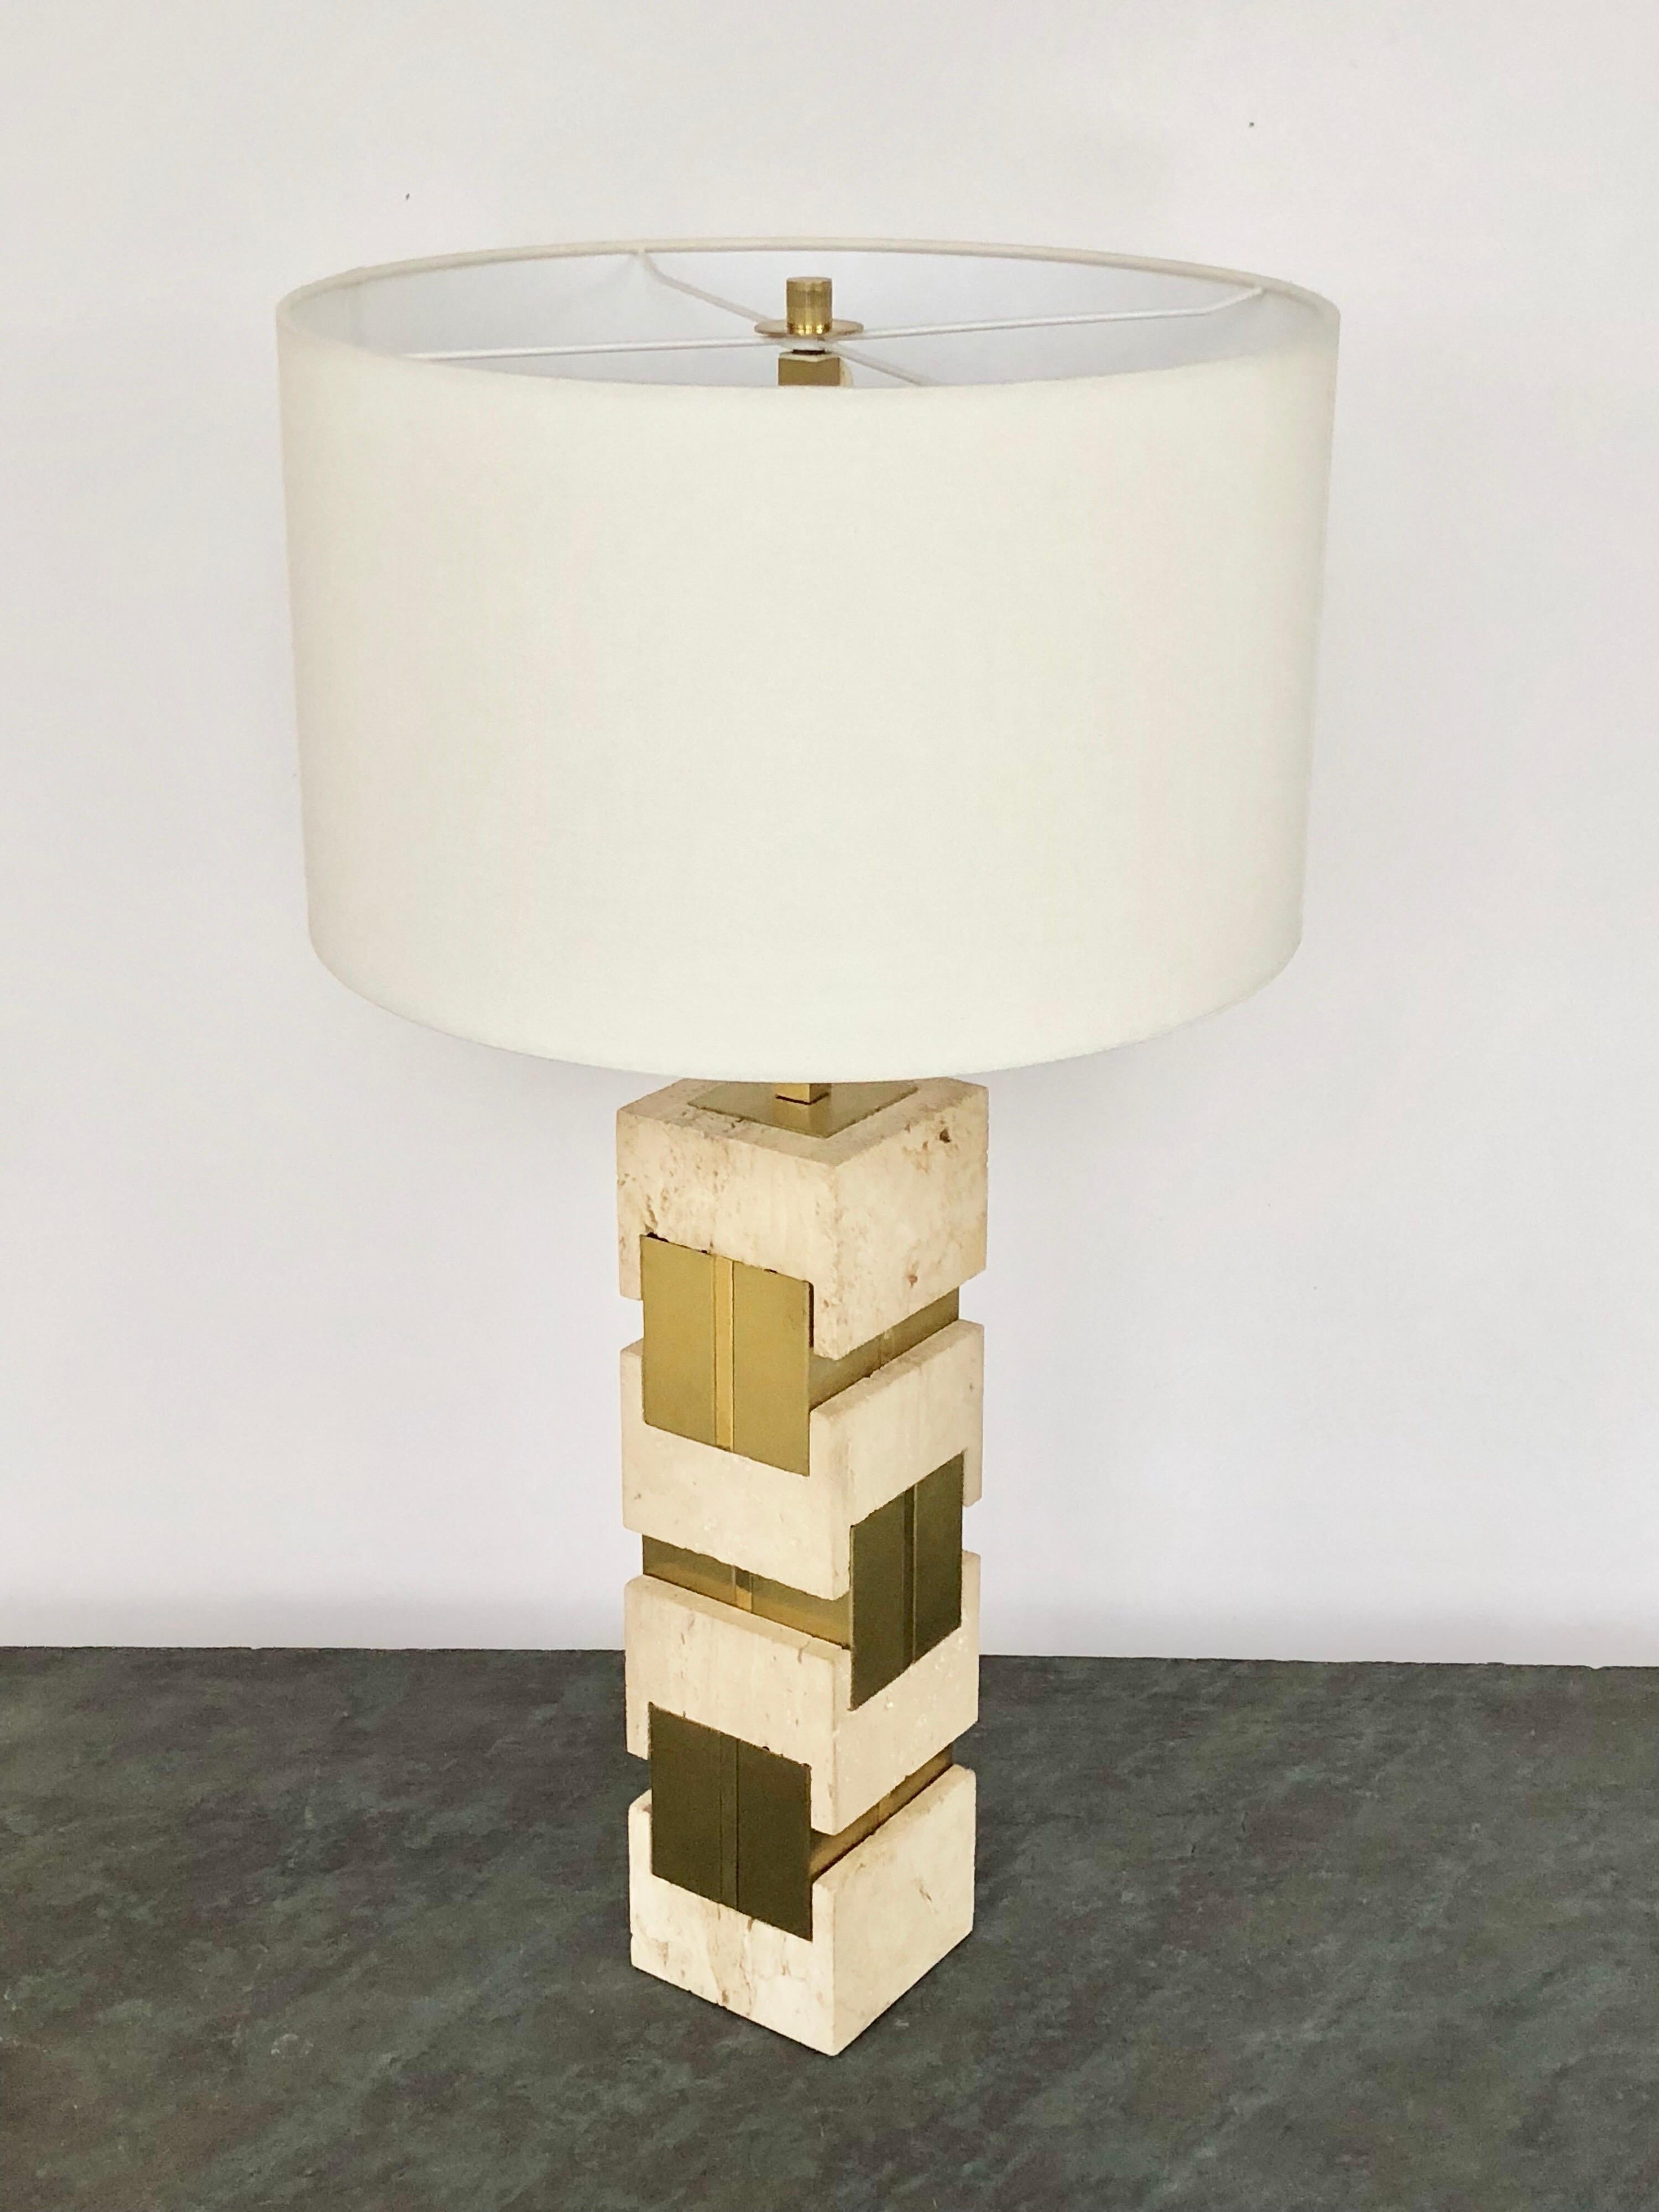 A large travertine marble and brass table lamp by Gaetano Sciolari. Retains the original square shade. The marble pieces interlock with the brass elements and create a look reminiscent of jewelry. Retains original square shade and finial. Signed on